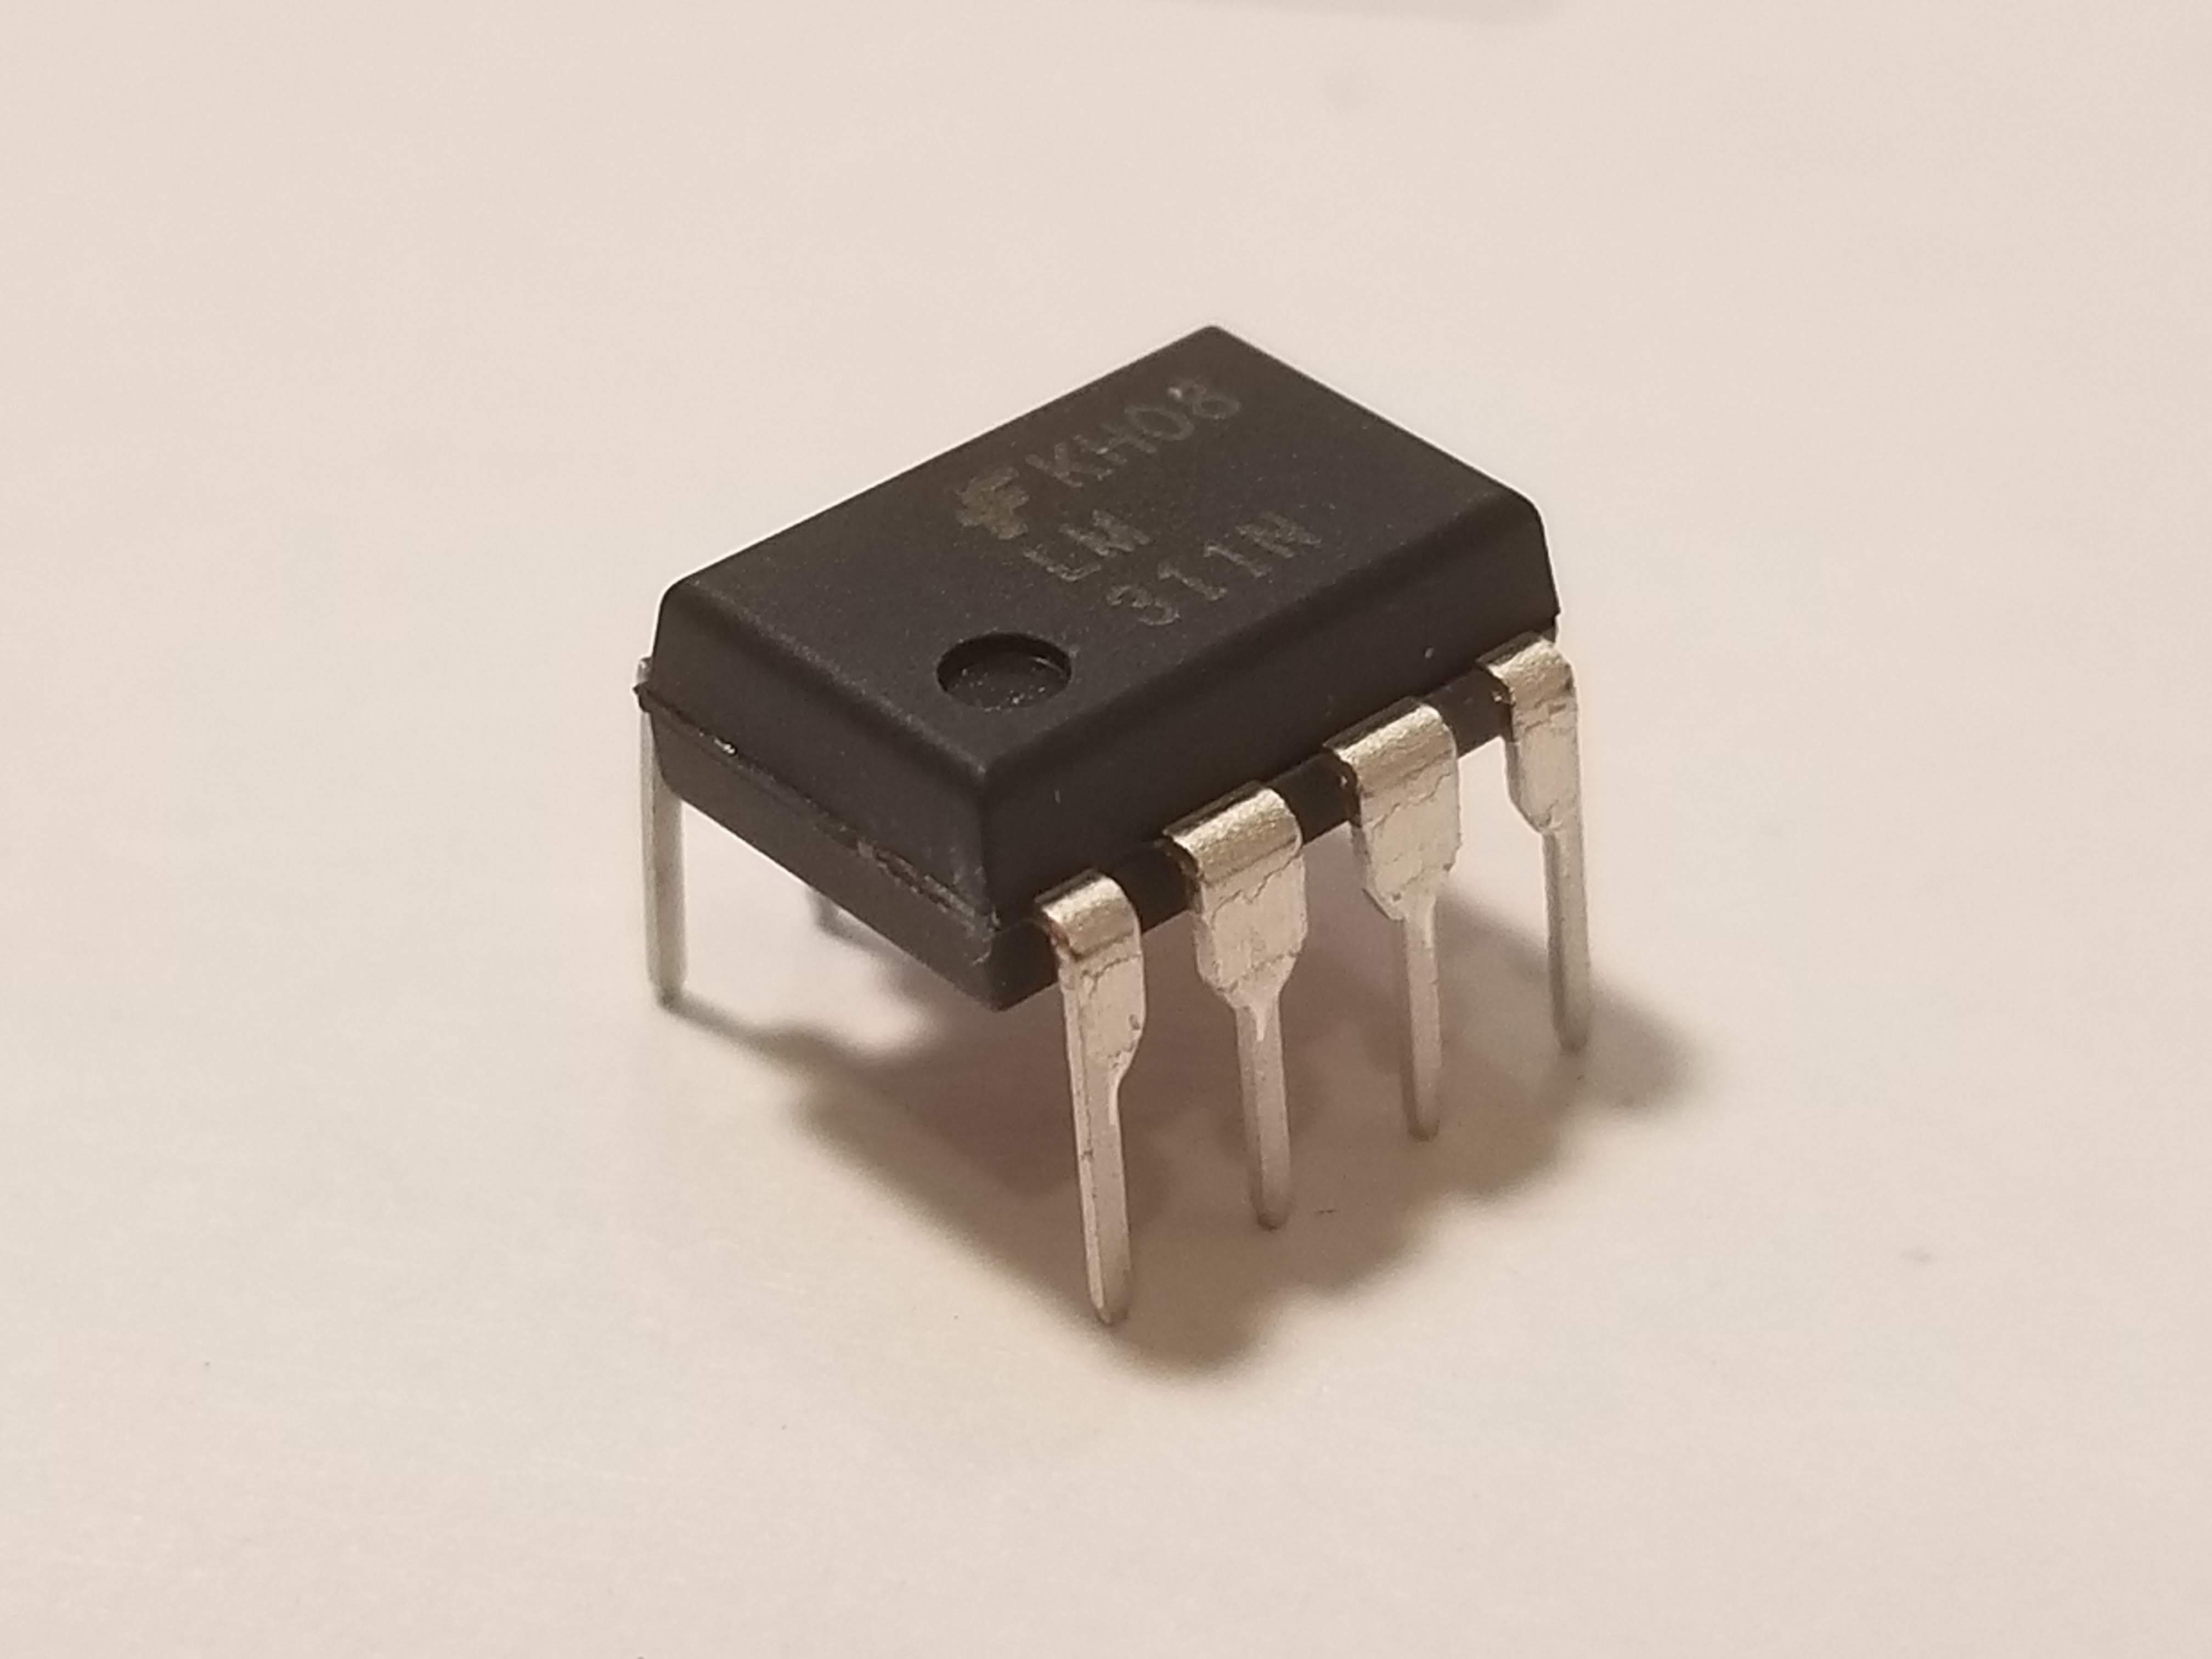 Picture of LM311 Comparator